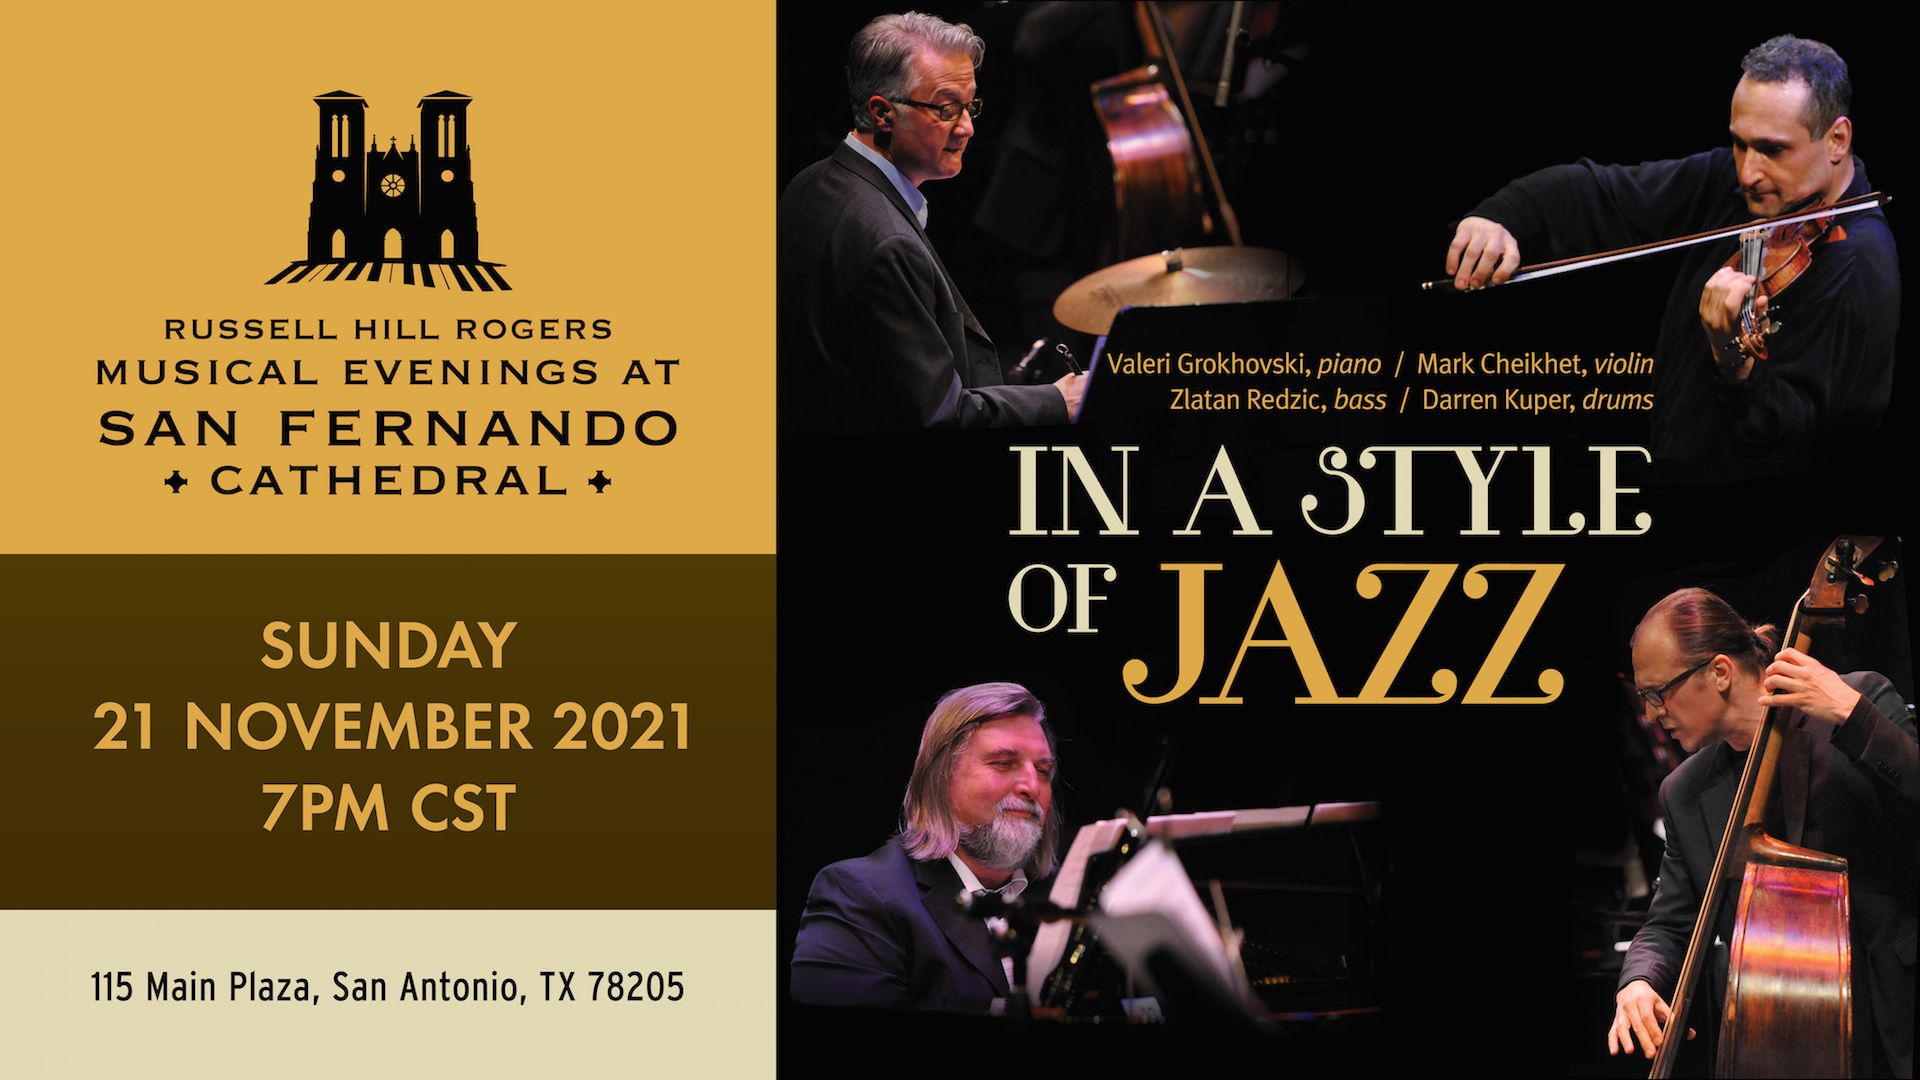 Event Graphic, Russell Hill Rogers Musical Evenings at San Fernando Cathedral, Sunday 21 November 2021 7PM CST, concert titled In A Style of Jazz